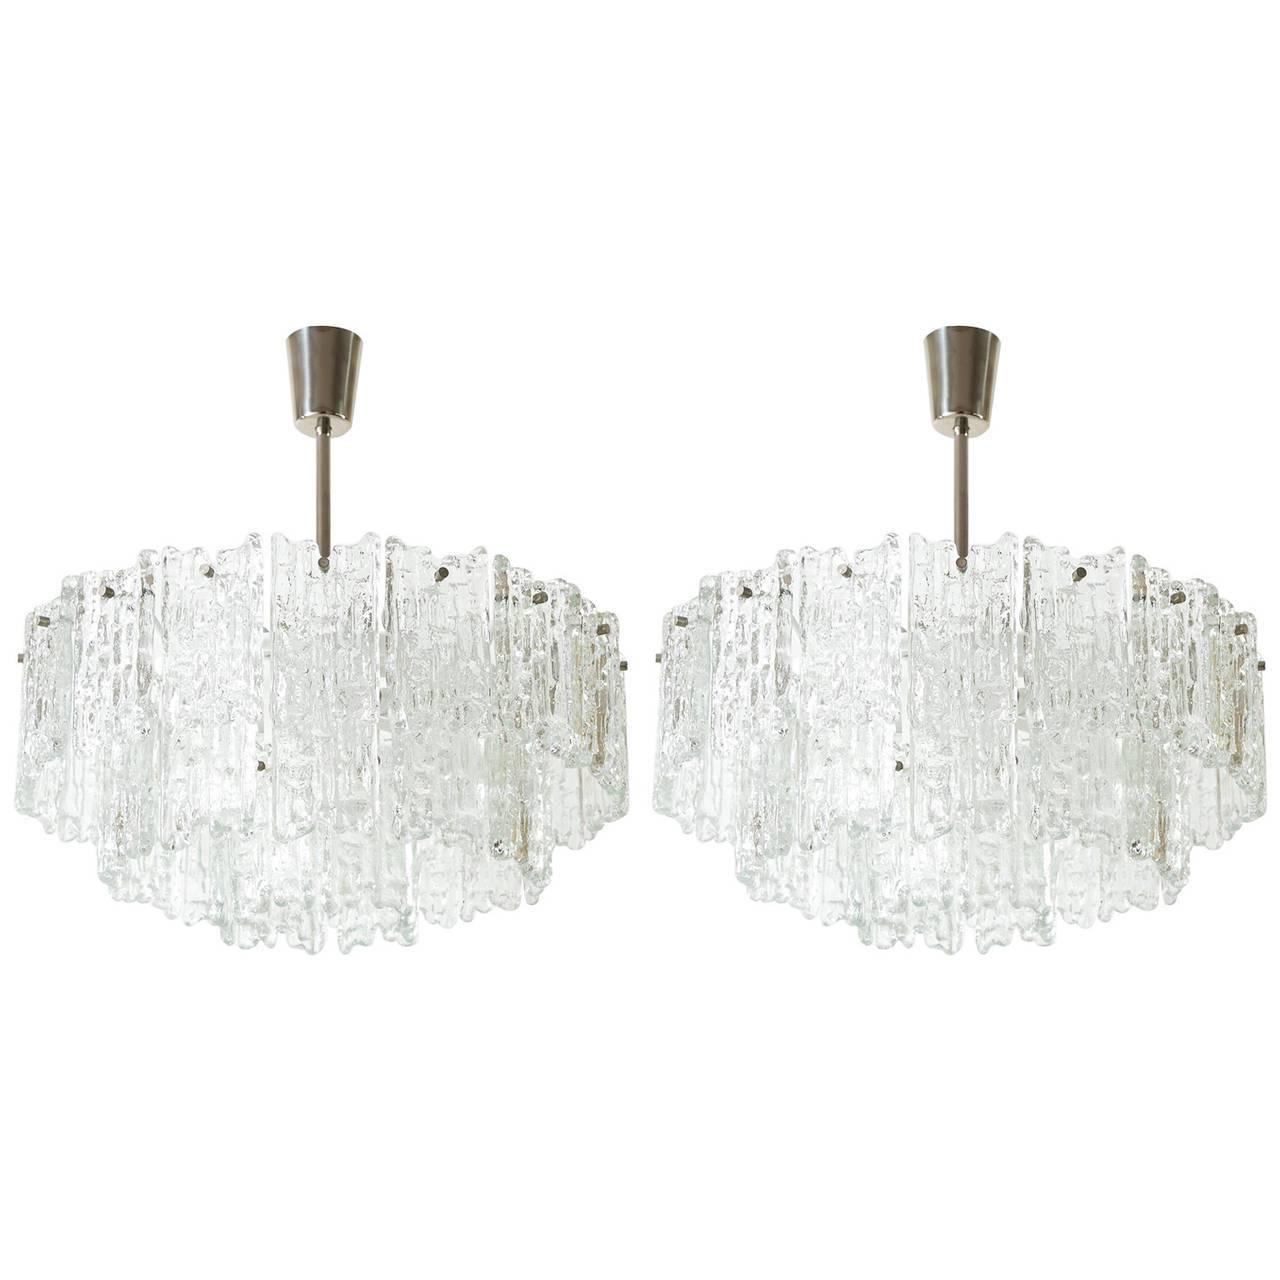 A set of two beautiful icicle glass chandeliers with a 'Finger' pattern by J.T. Kalmar, Austria, manufactured circa 1960. Each light fixture is made of frosted glass blocks which are hanging on a white lacquered hardware. Each chandelier has nine